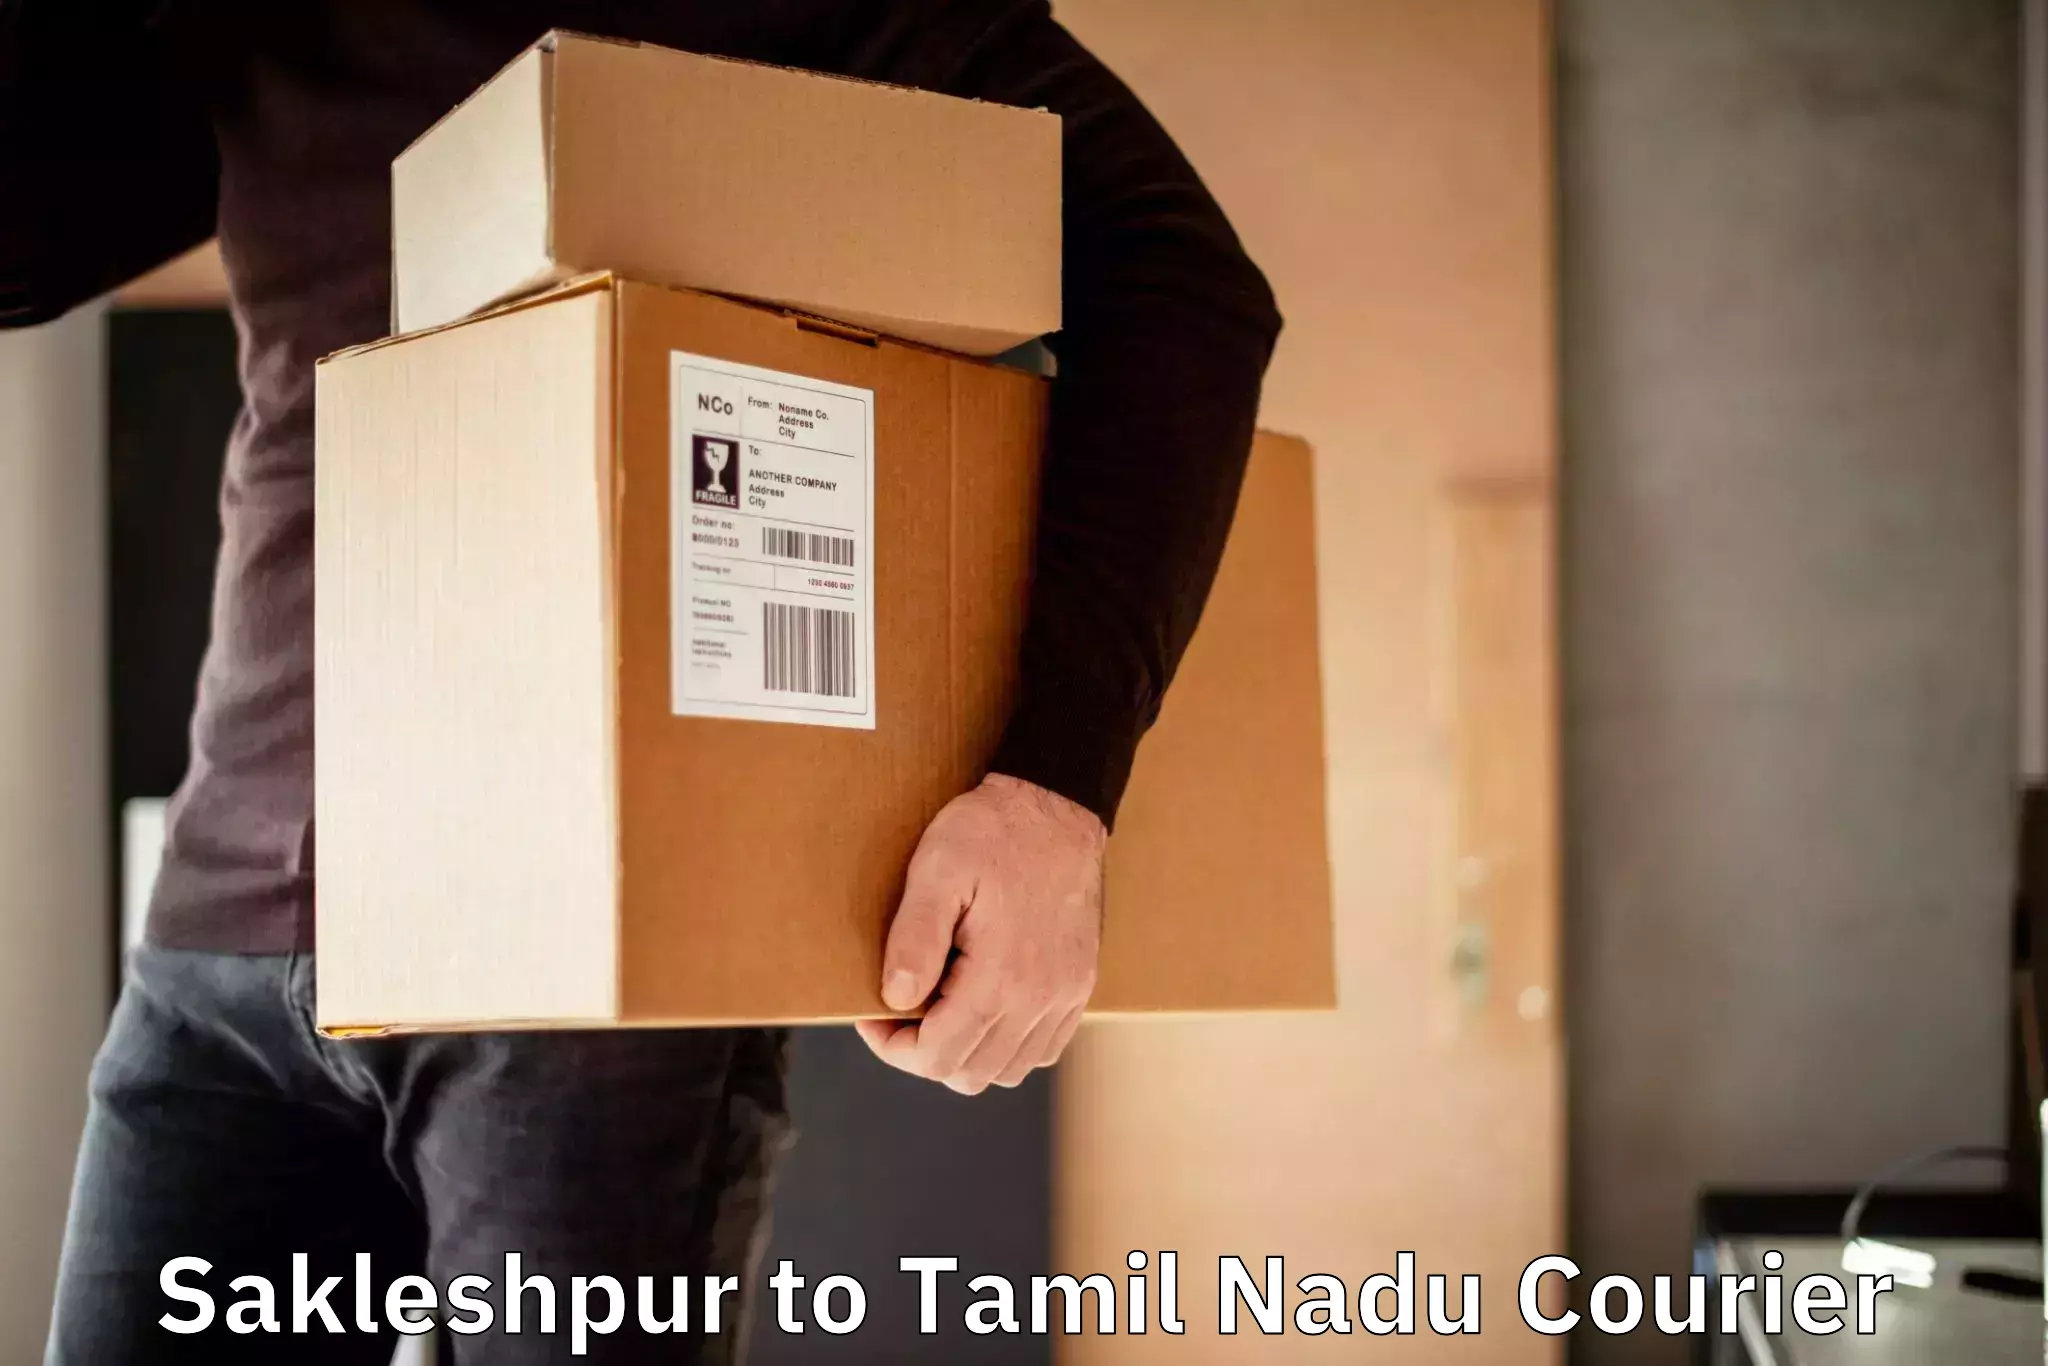 Same-day delivery options Sakleshpur to Meenakshi Academy of Higher Education and Research Chennai